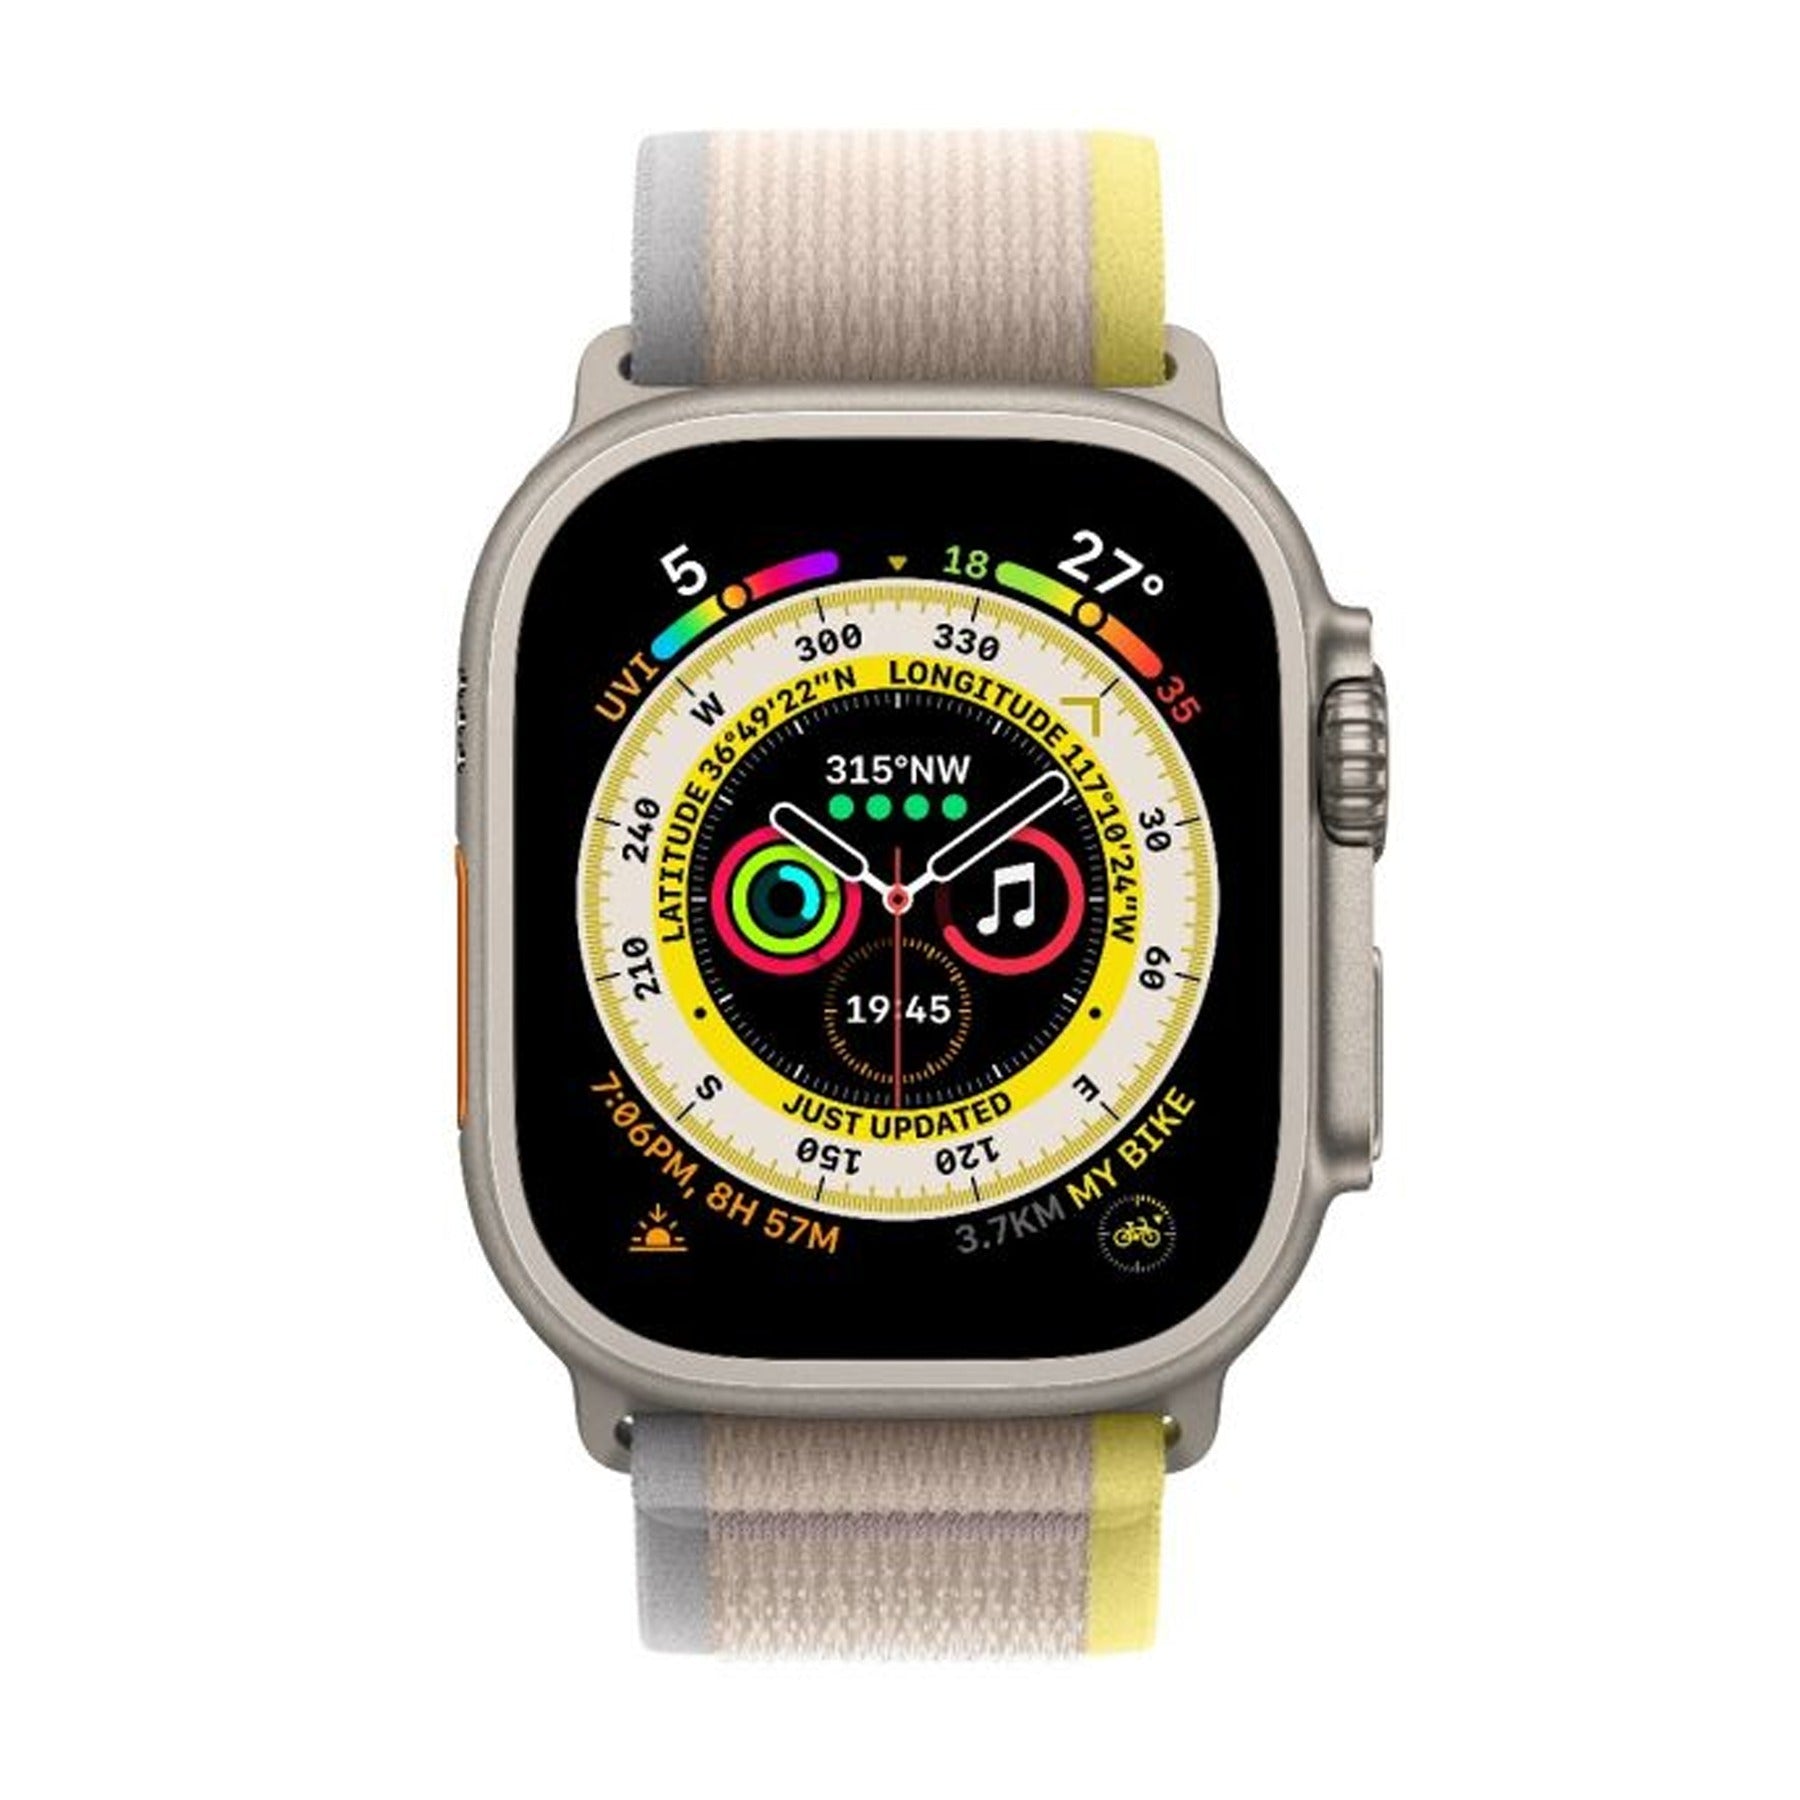 Buy 2 Get 1 Free | Ultra 8 Smart Watch 49mm with Bluetooth Calling